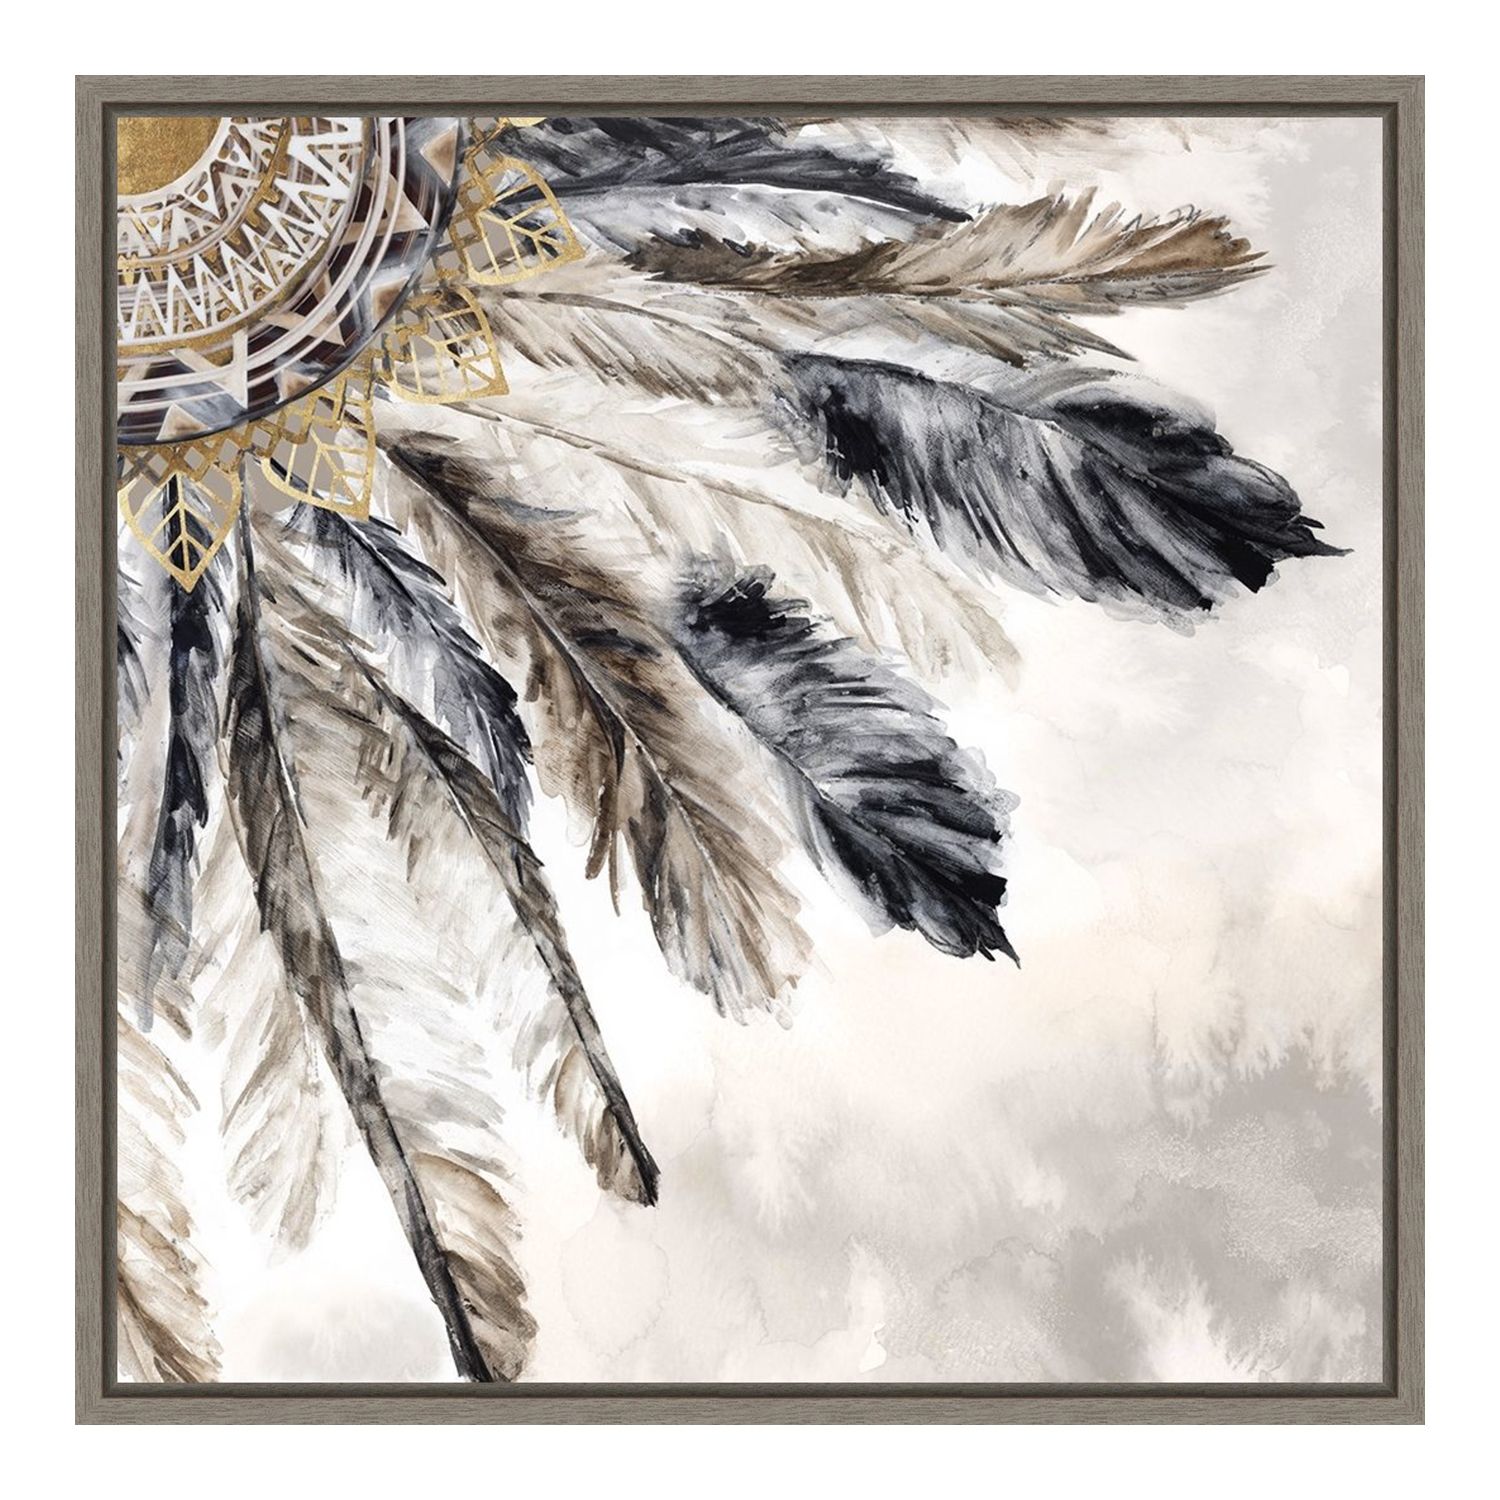 Trademark Fine Art 'Gold Feathers III on White' Canvas Art by